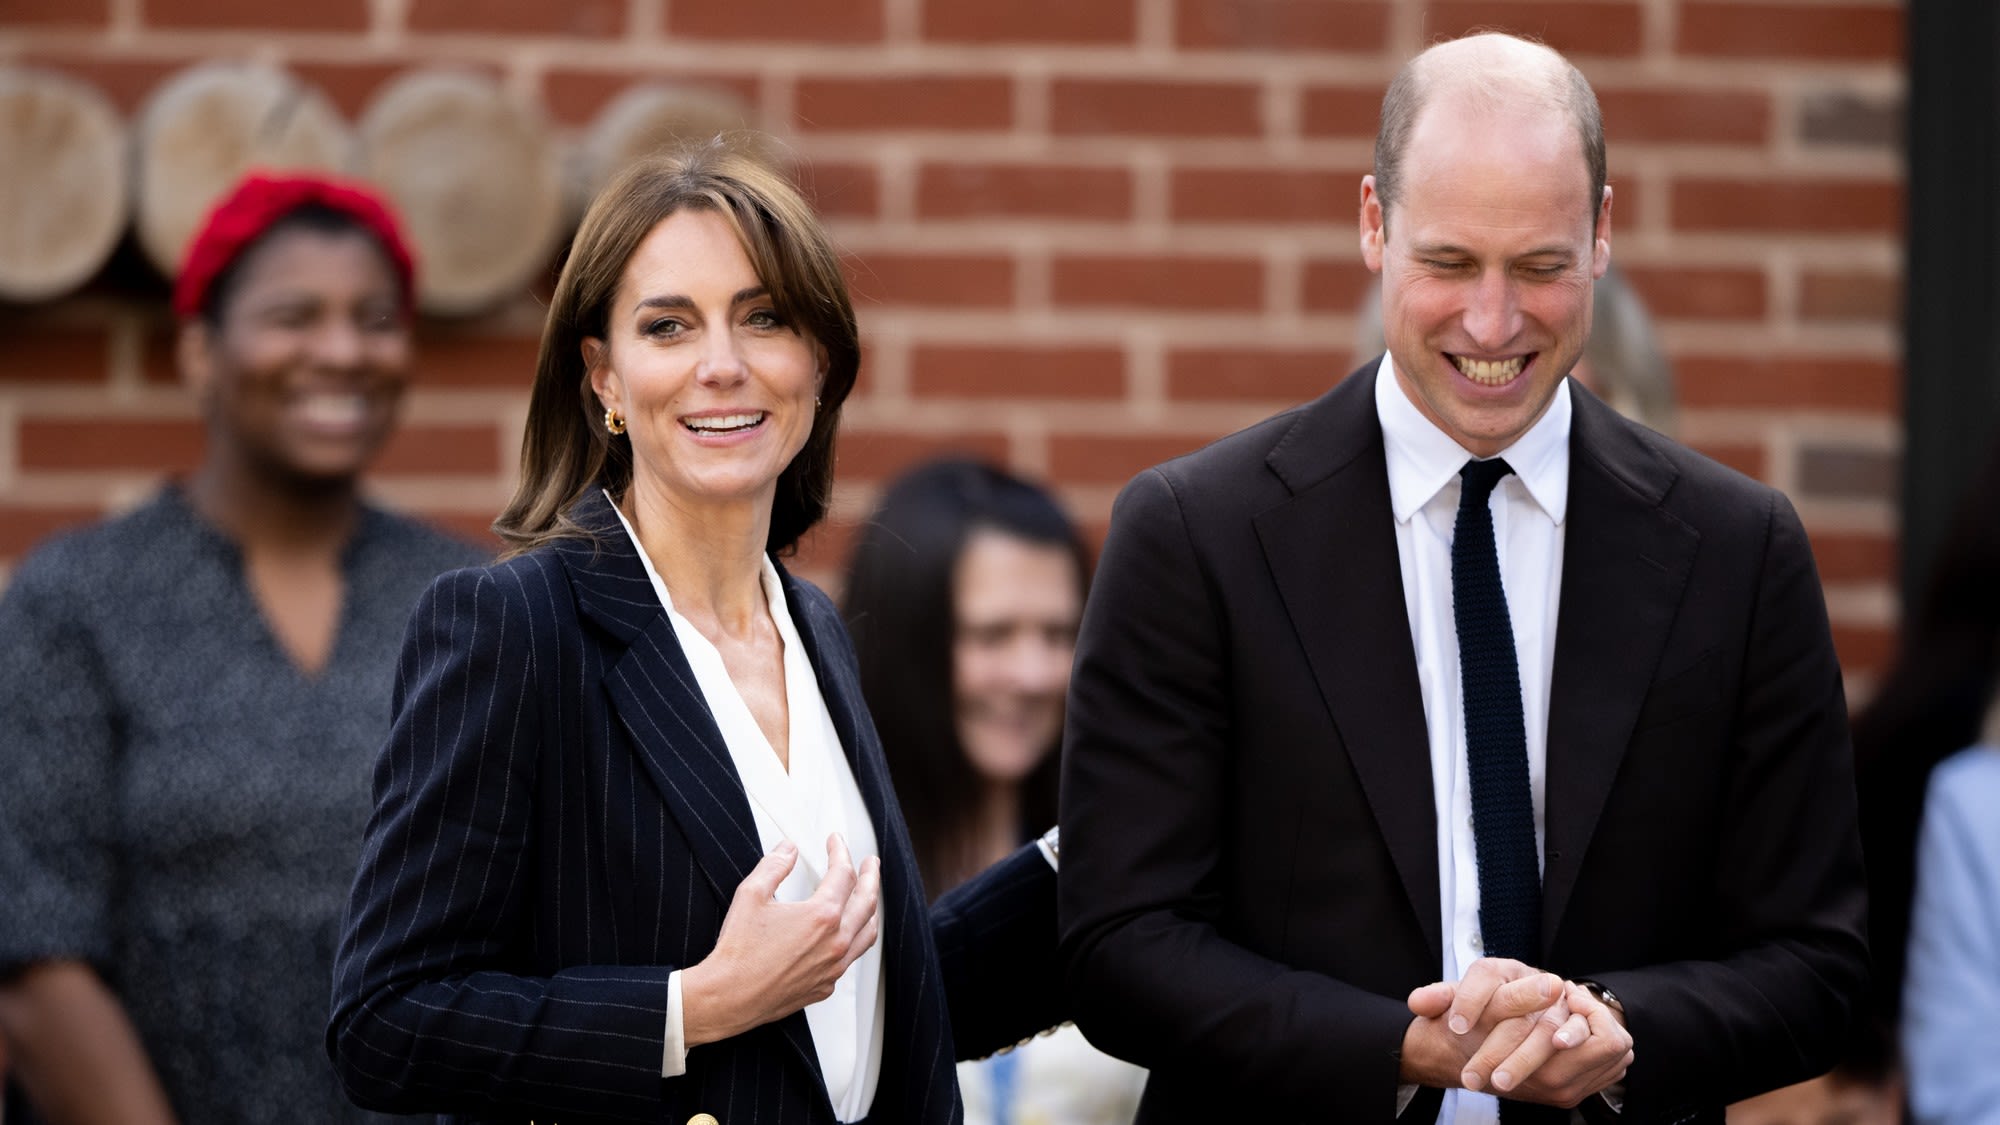 Fans Worry Over William and Kate Anniversary Photo